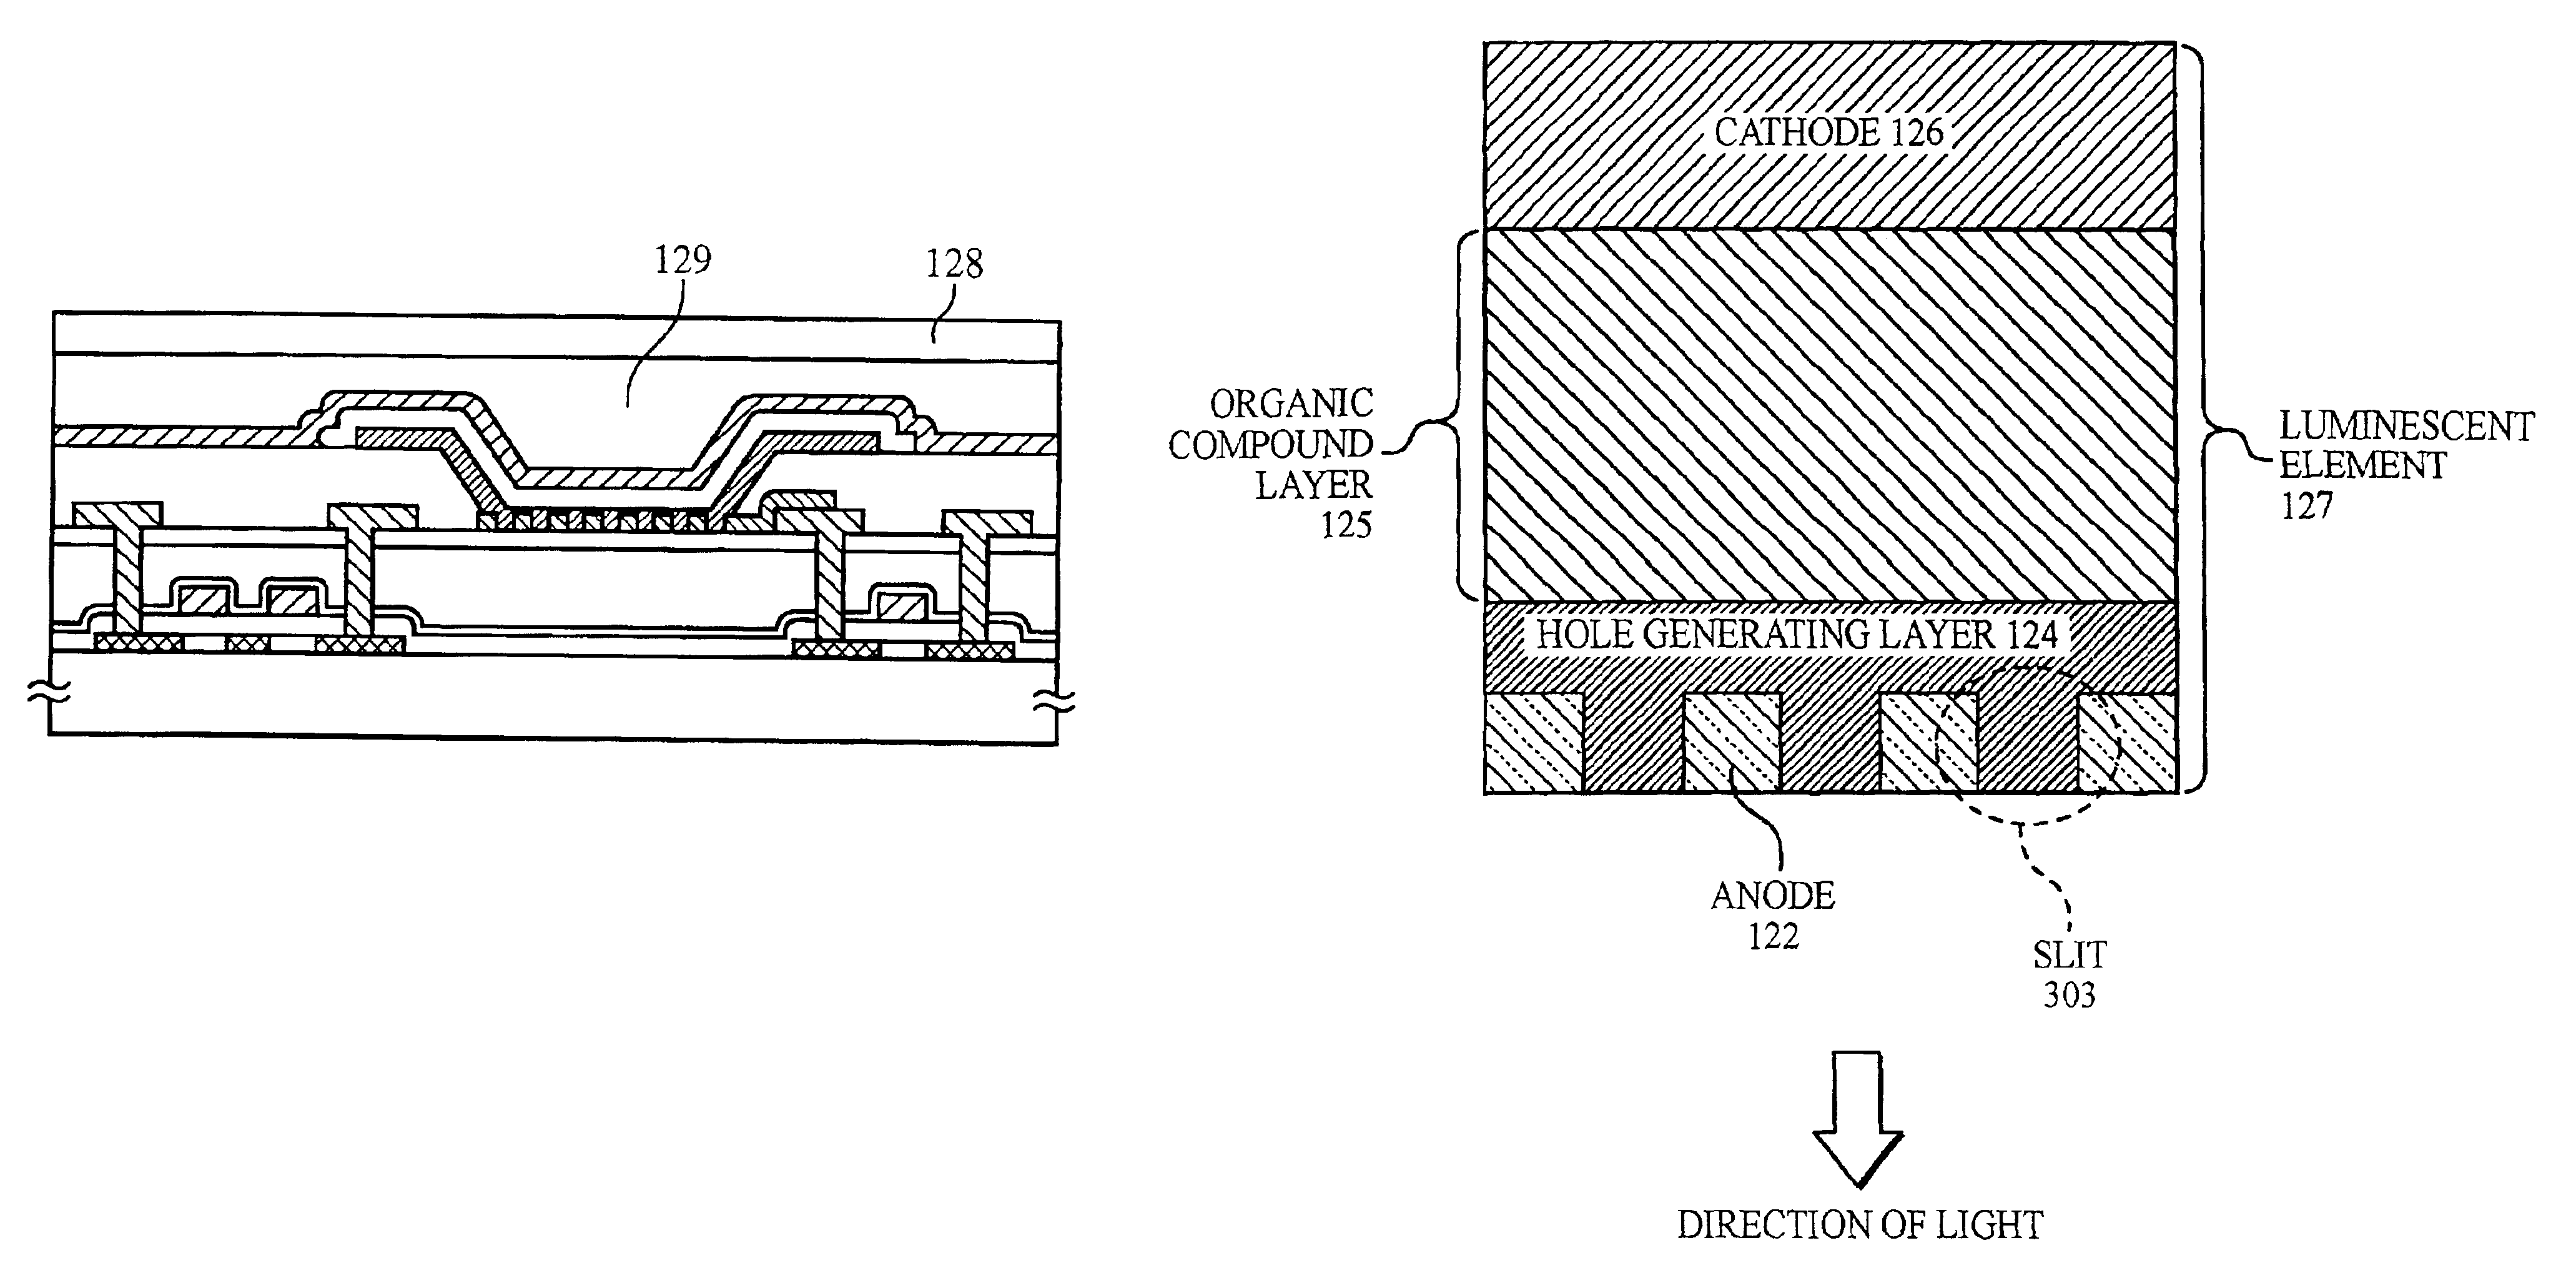 Luminescent device and process of manufacturing the same